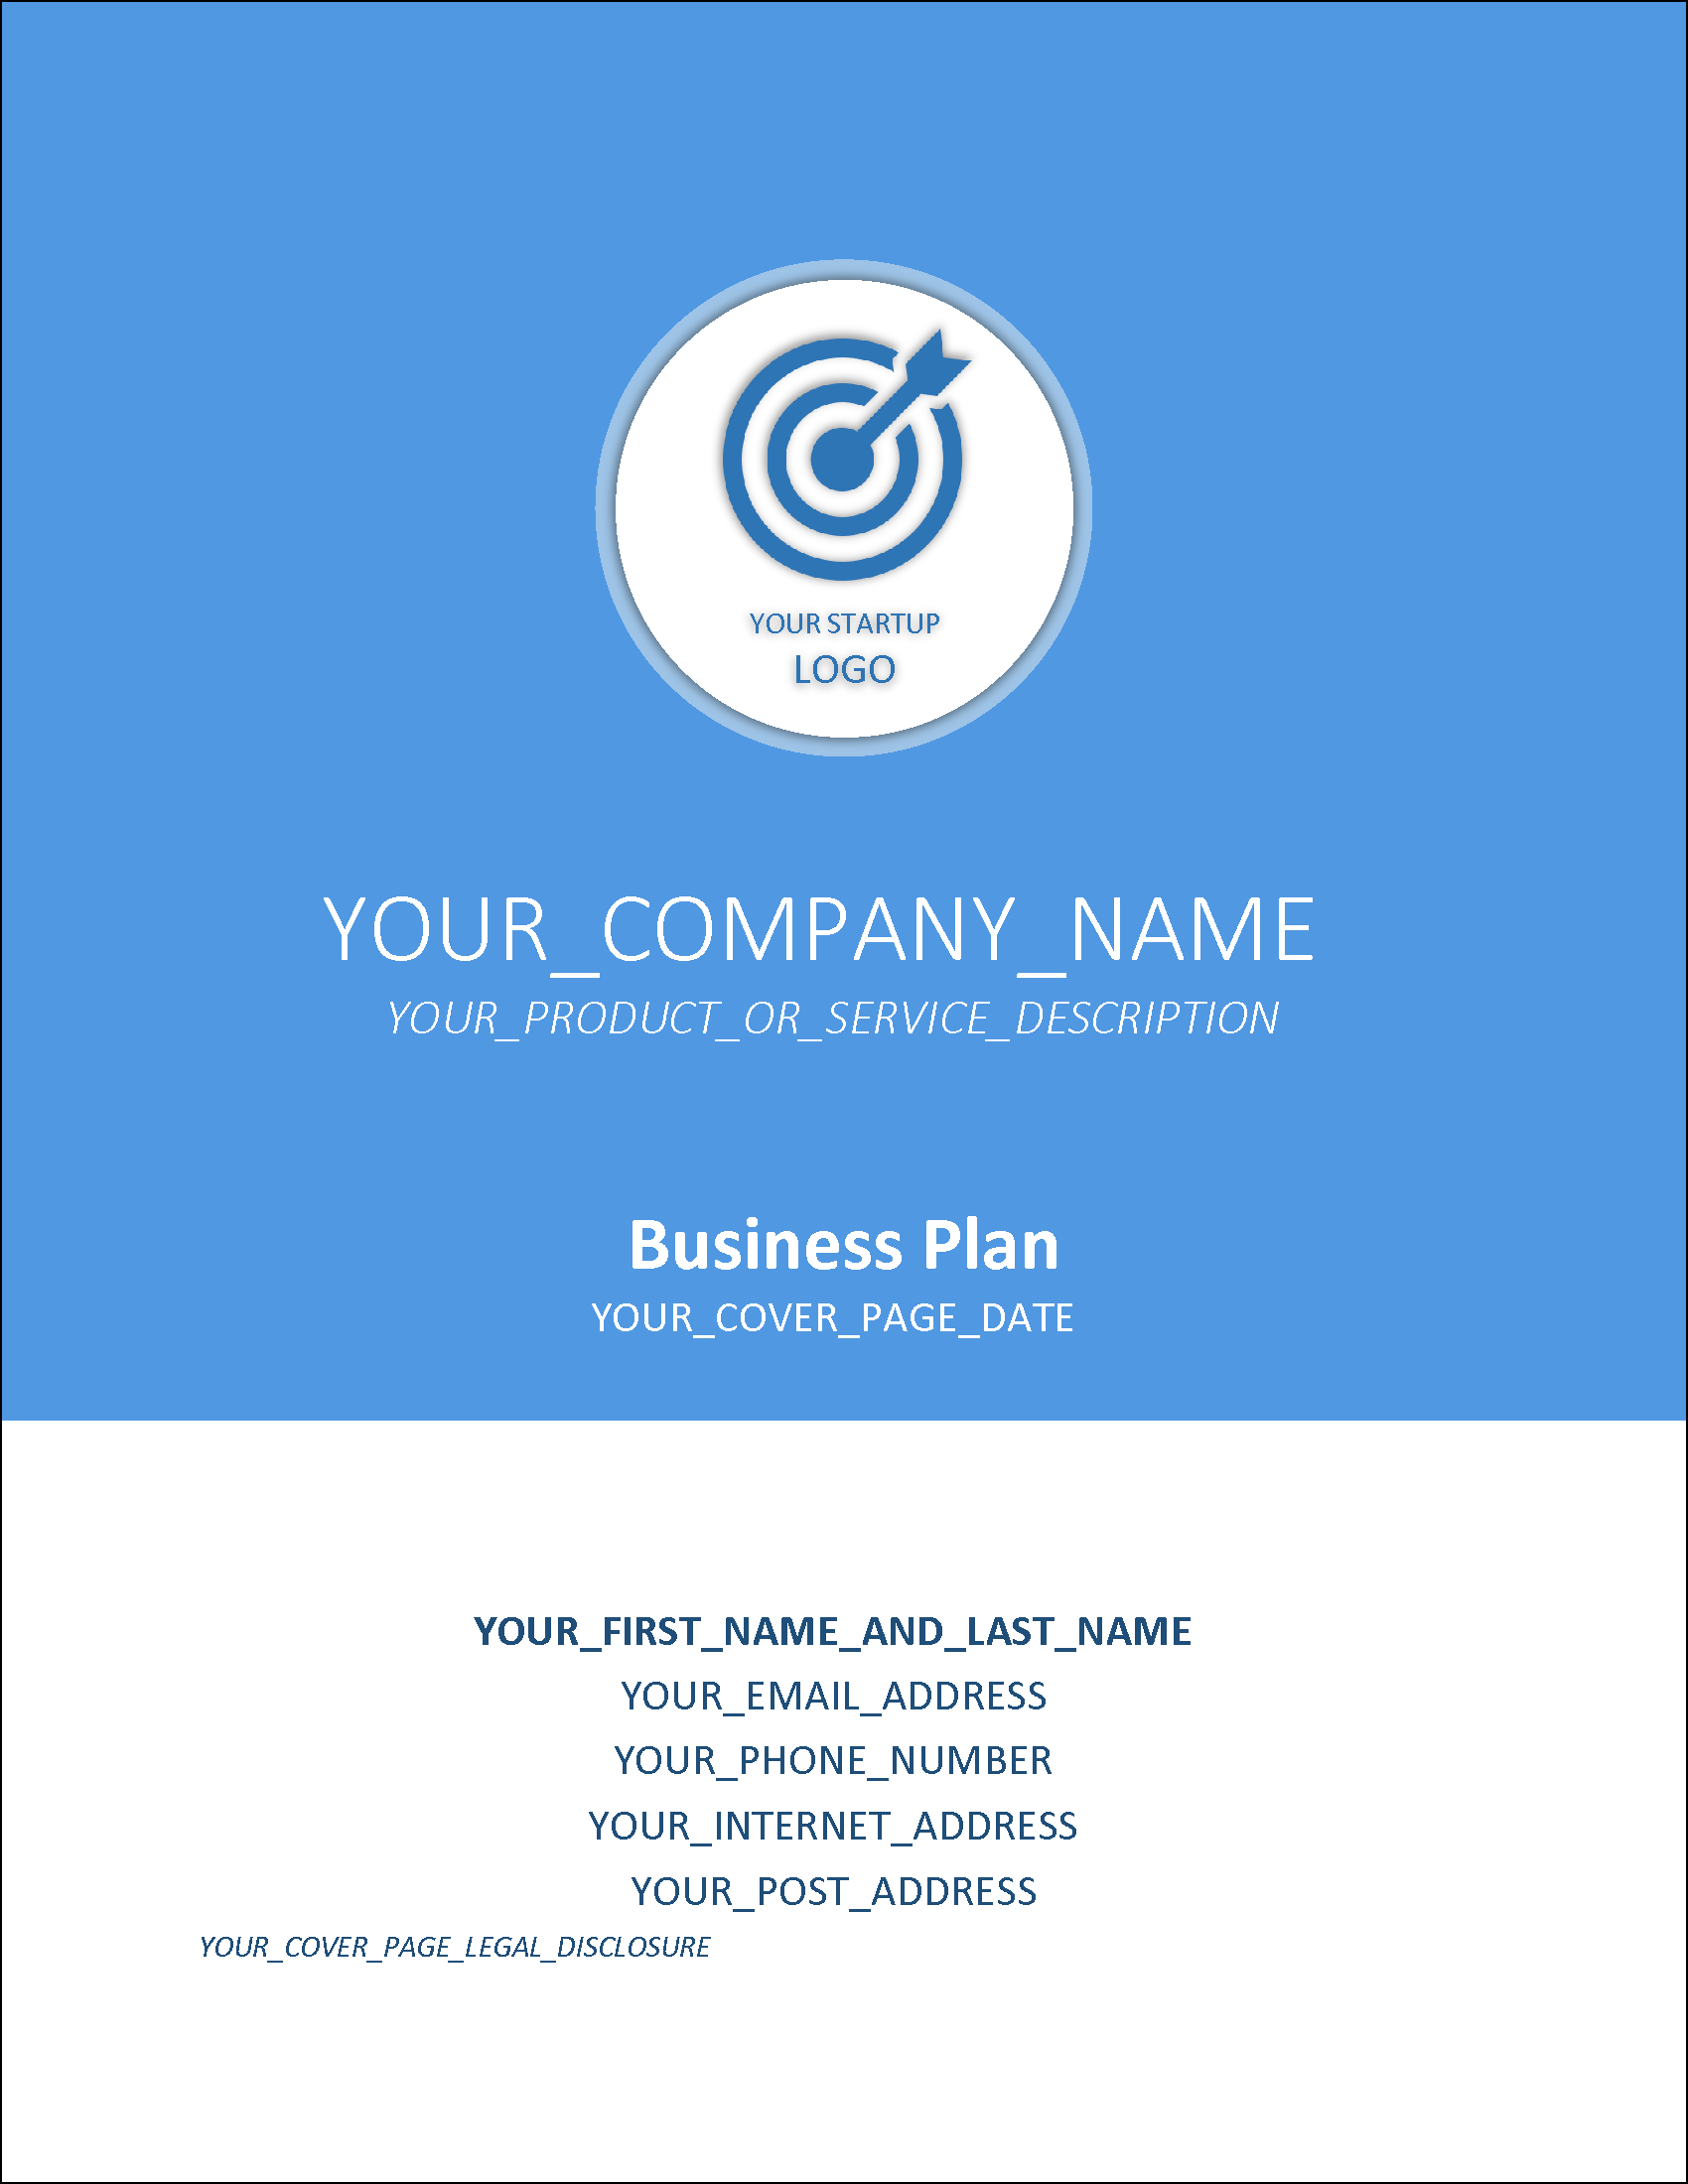 business plan front page example